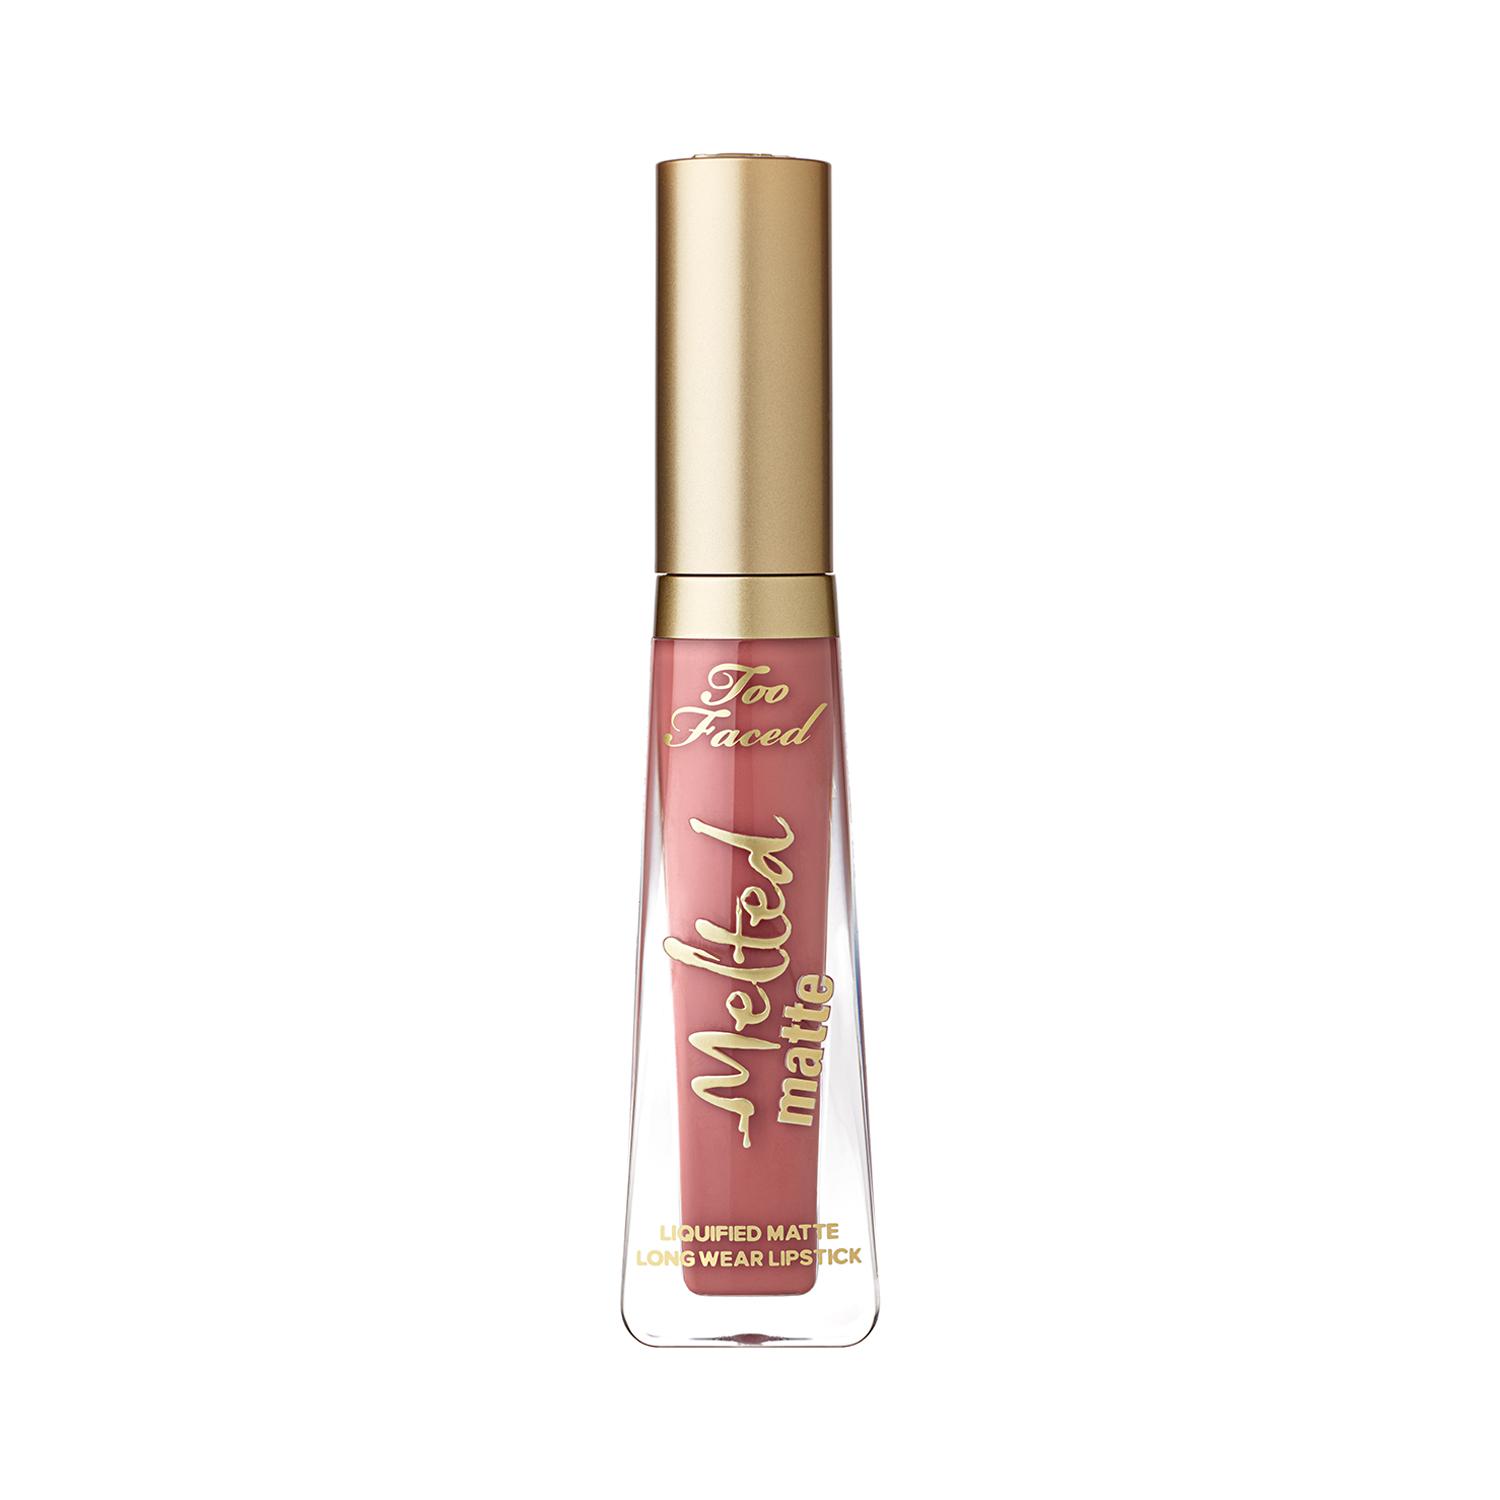 Too Faced Melted Matte Lipstick - Poppin' Corks (7ml)